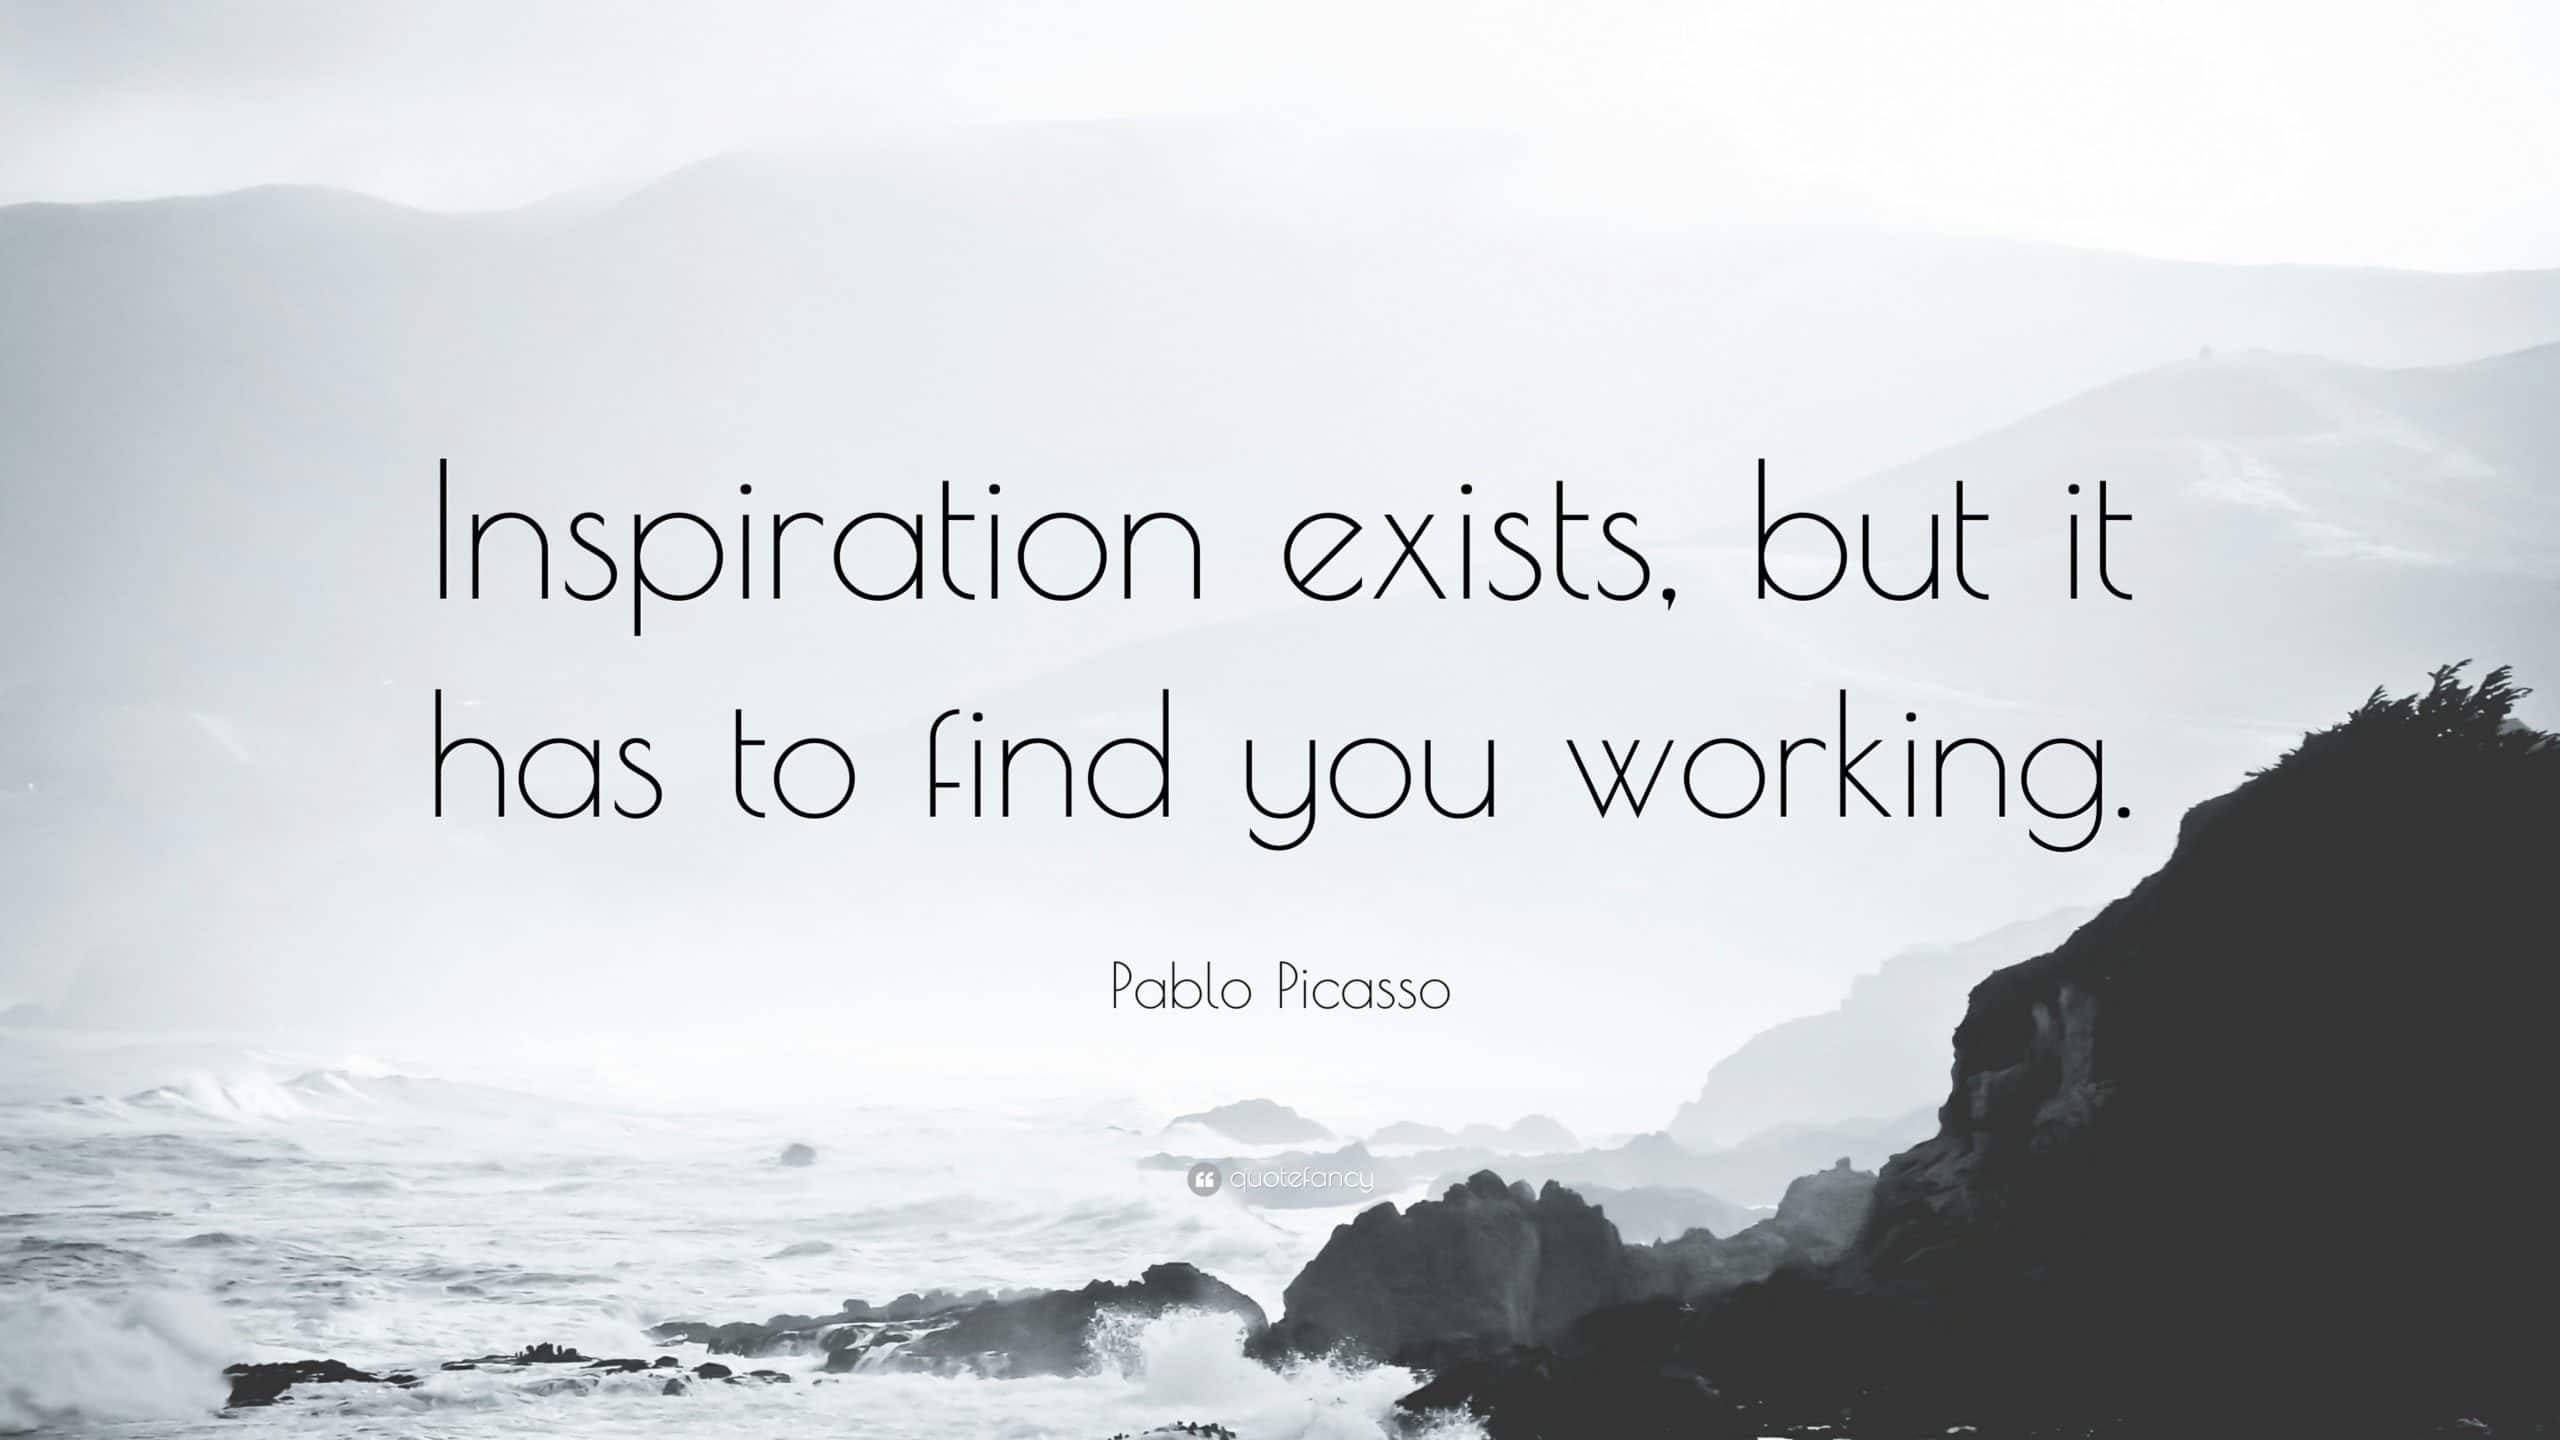 “Inspiration exists, but it has to find you working.” — Pablo Picasso